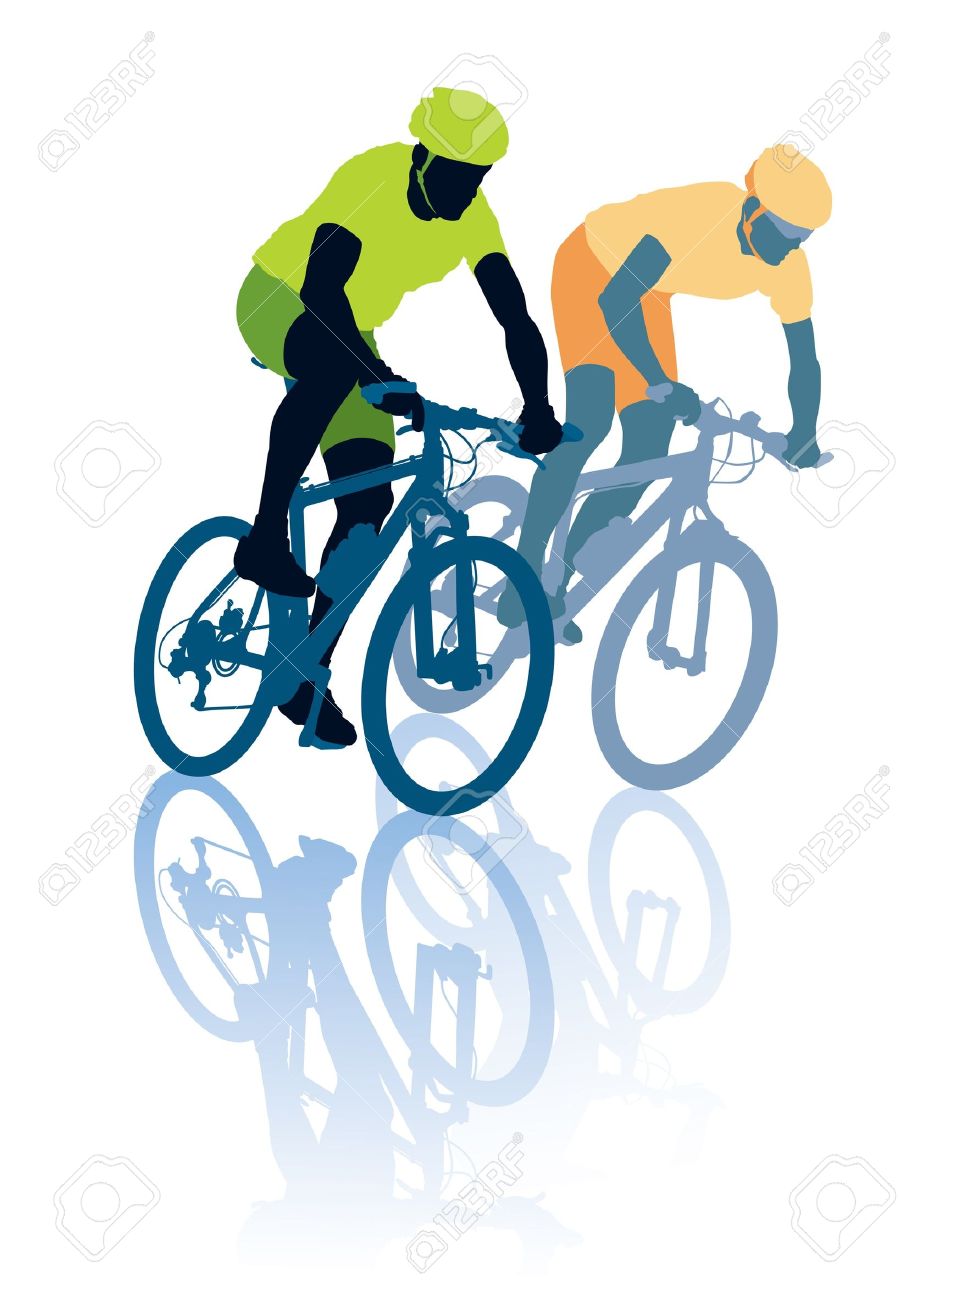 Cycle Race Clipart.